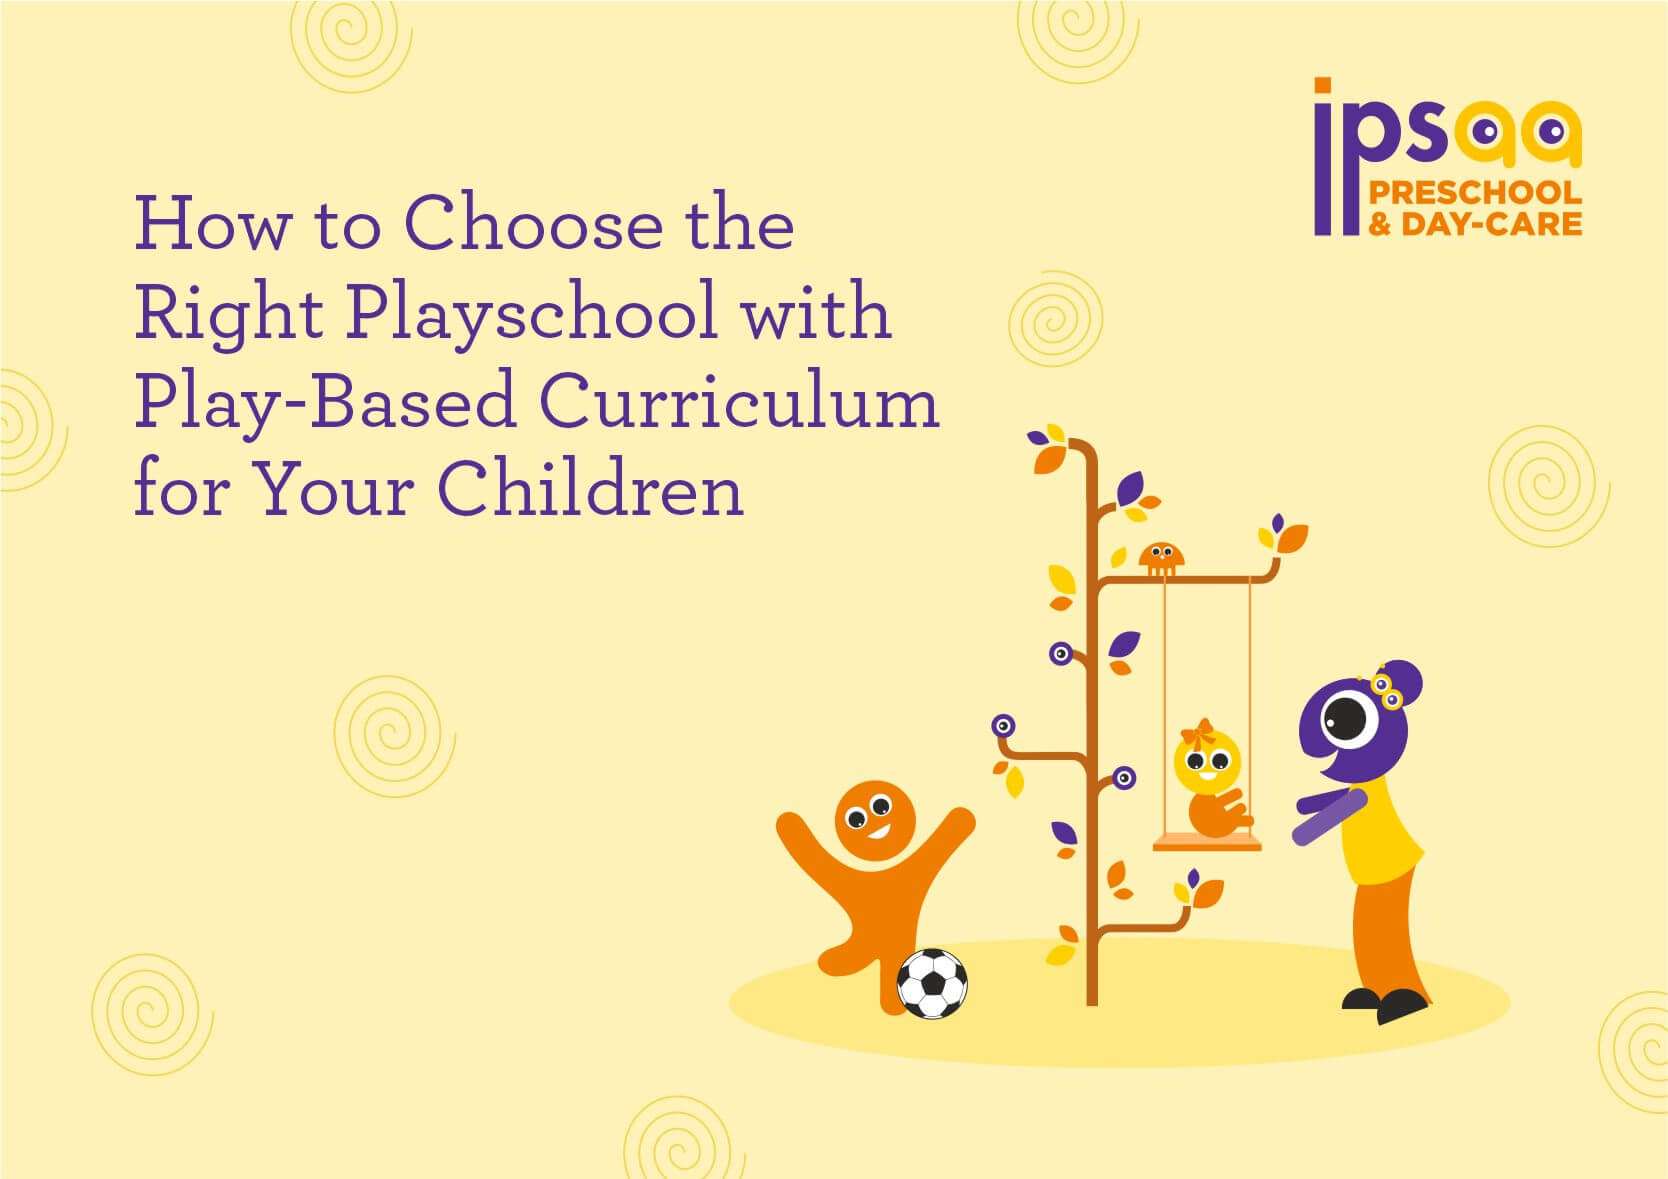 How to Choose the Right Playschool with Play-Based Curriculum for Your Children